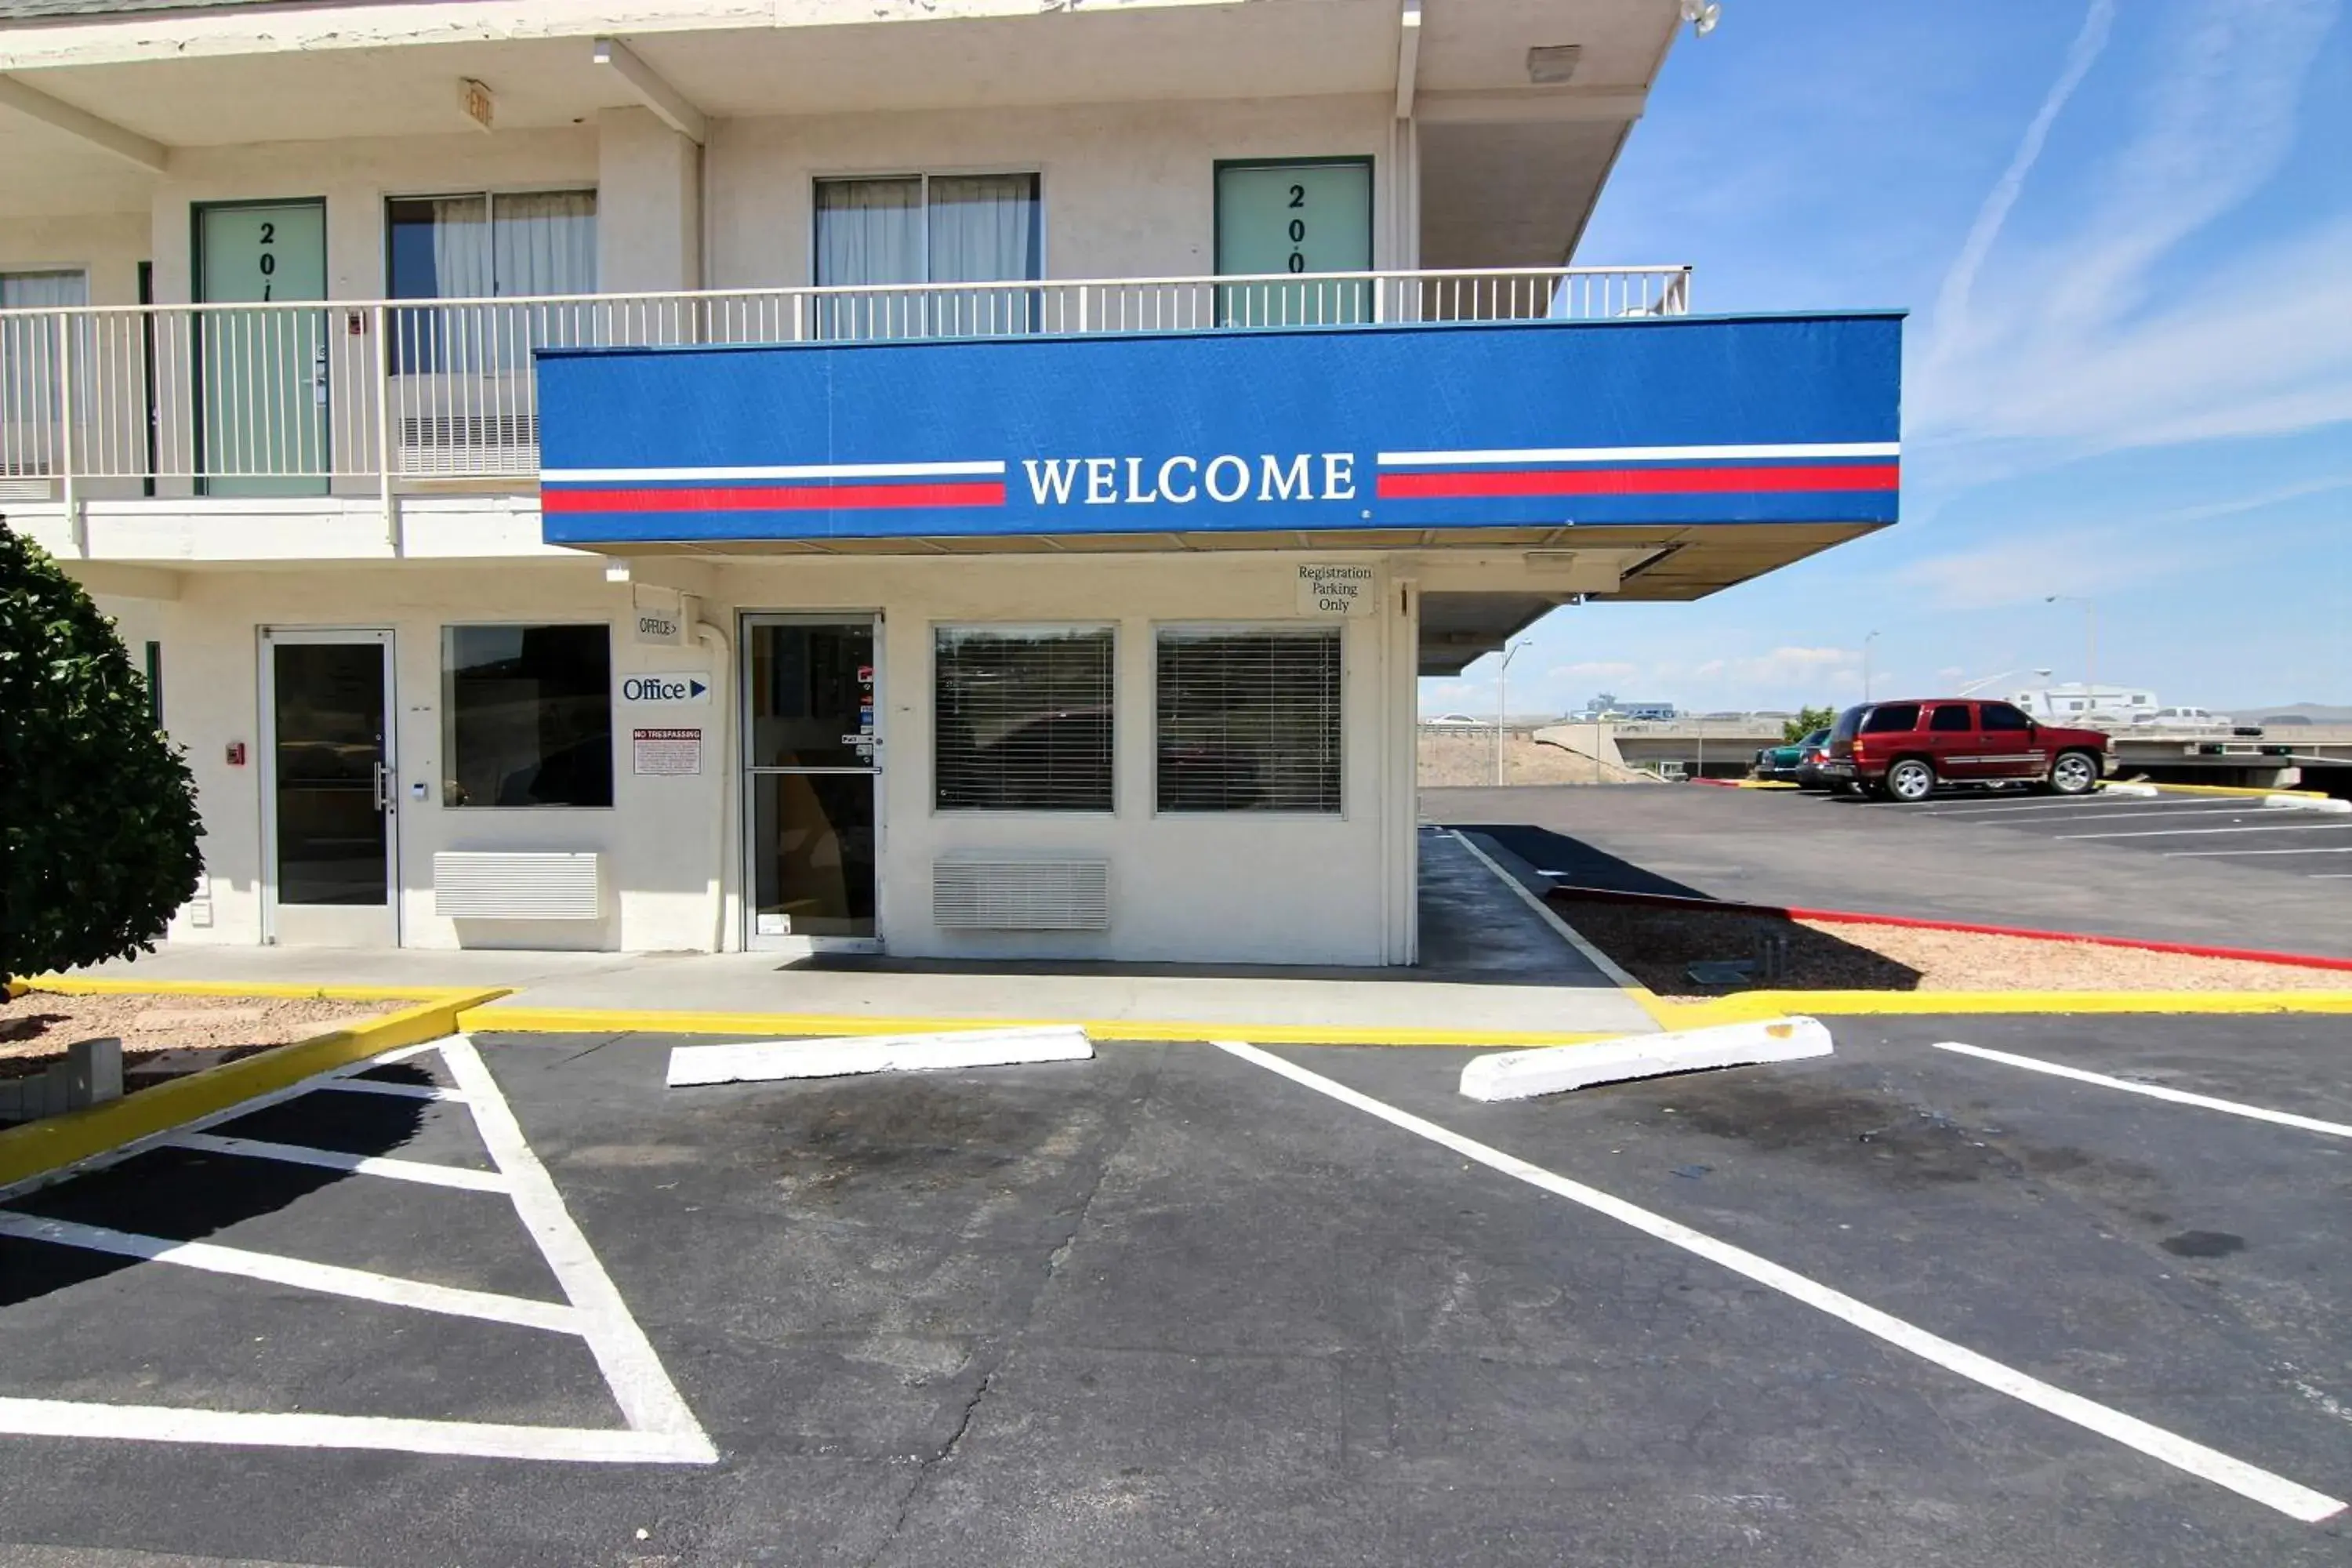 Property Building in Motel 6-Albuquerque, NM - South - Airport